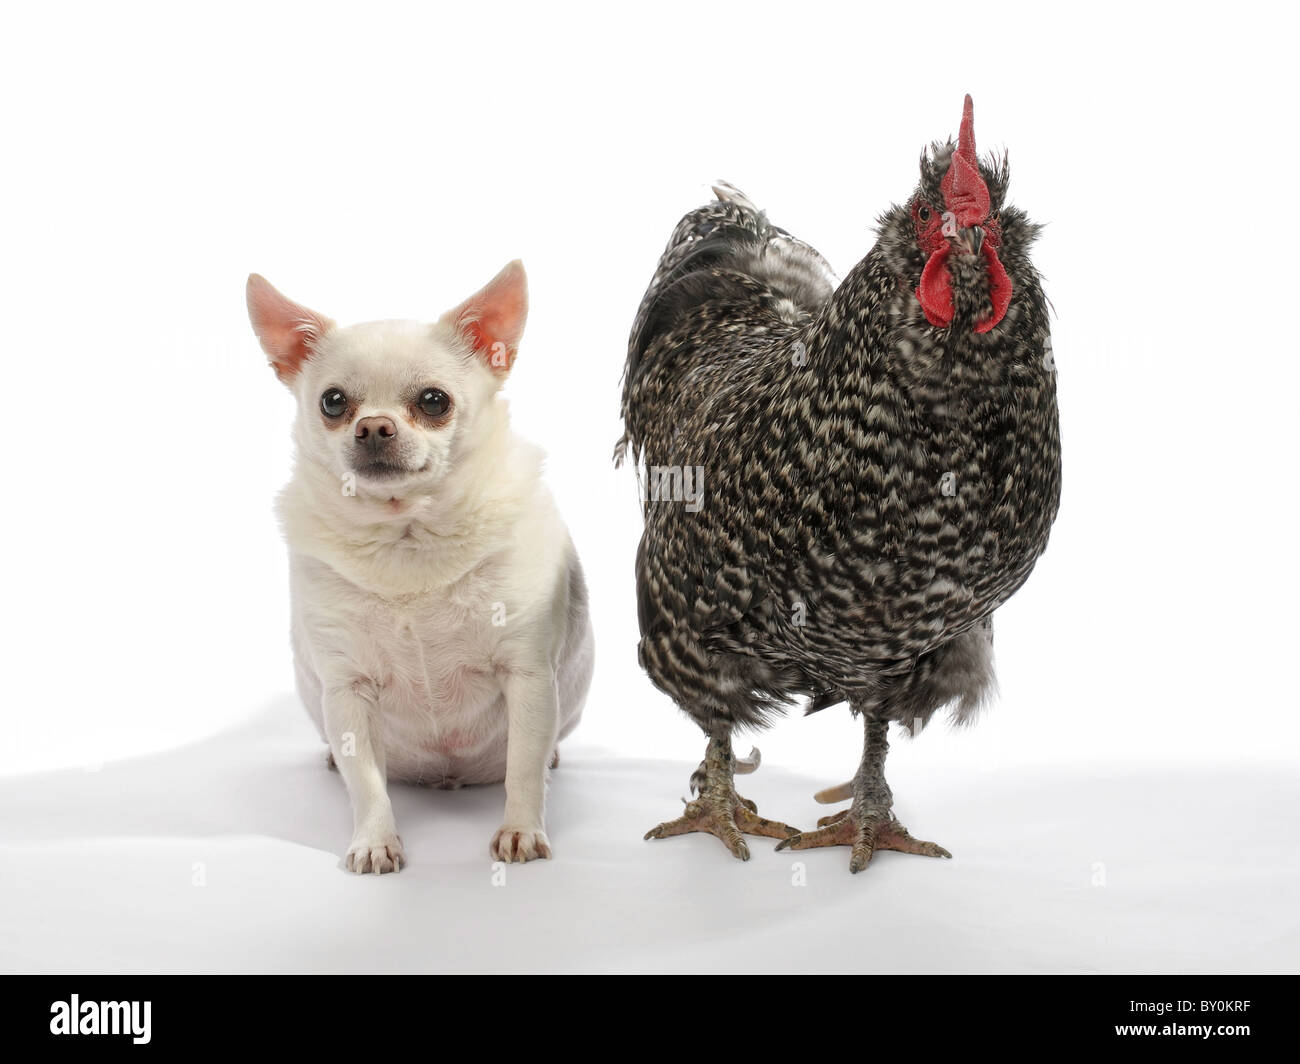 fat chihuahua and rooster chicken together on white background Stock Photo